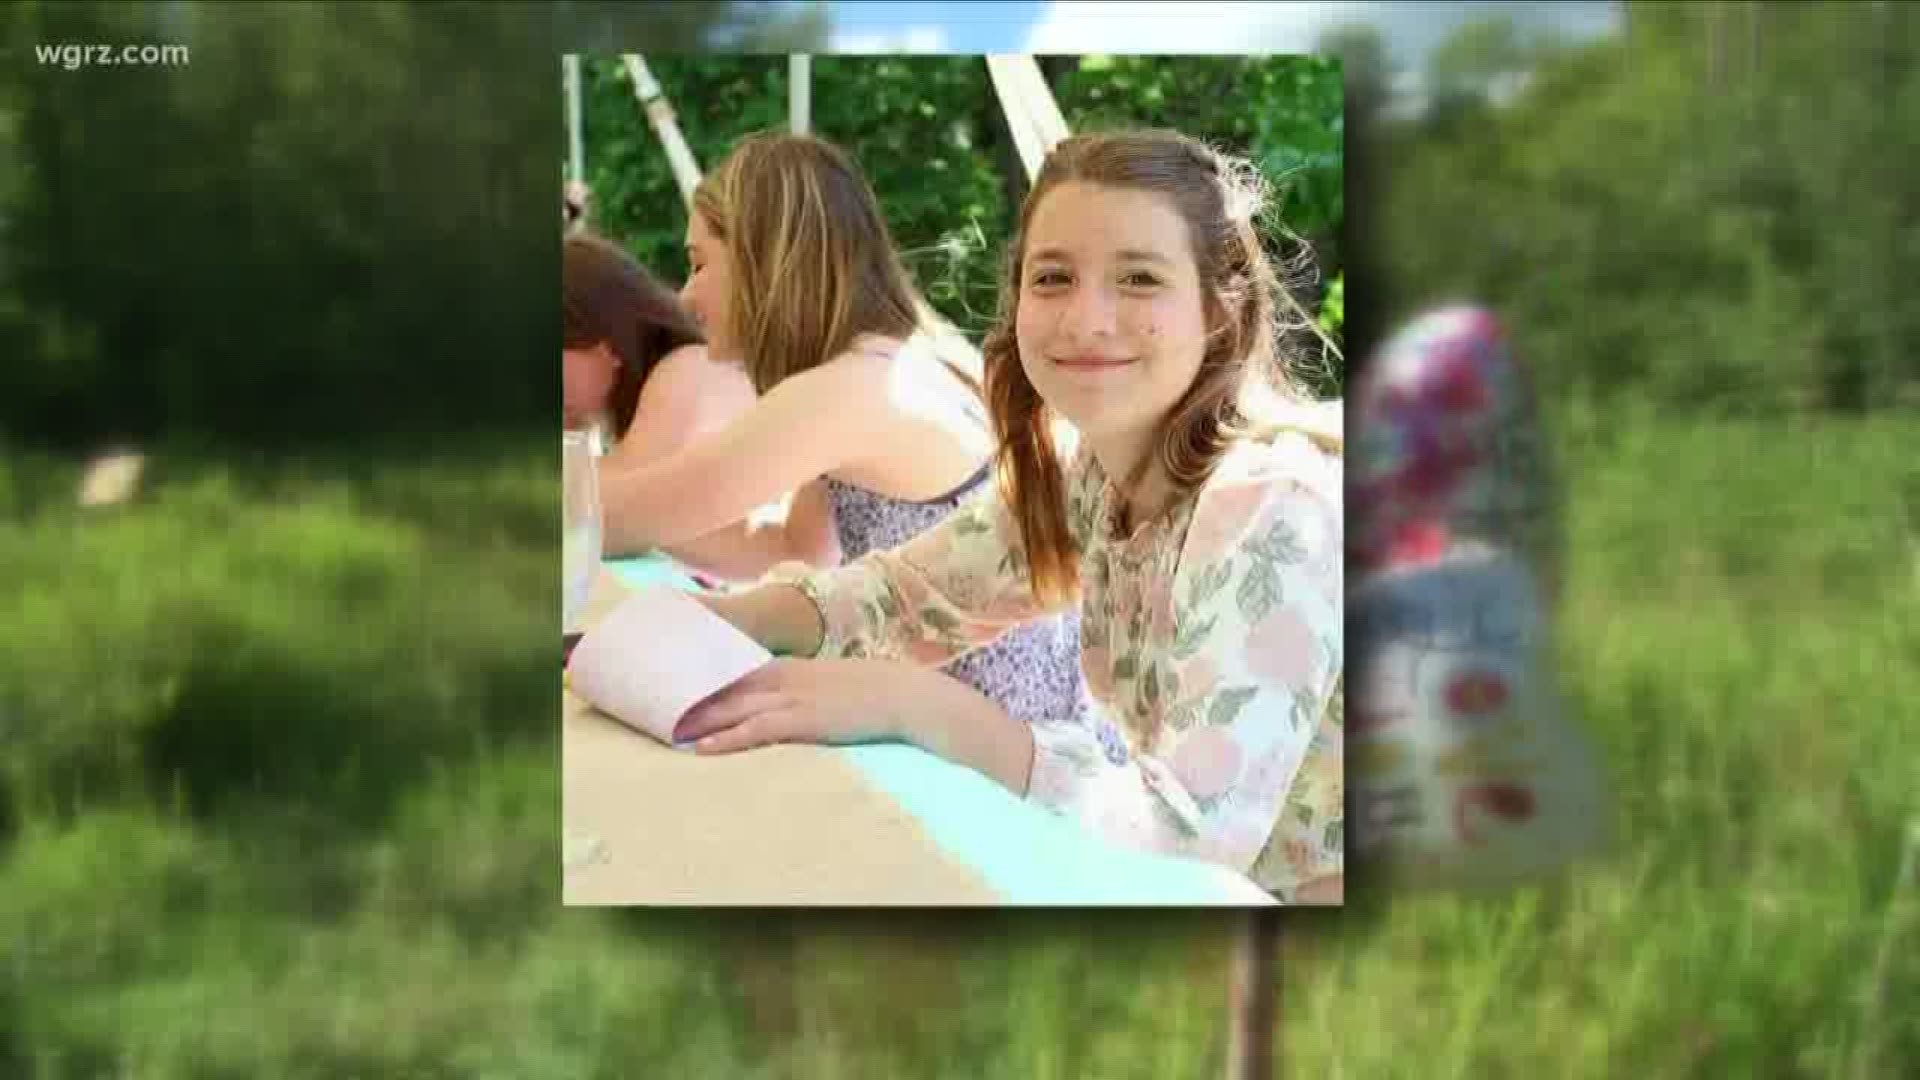 Famnily remembers 11-year-old crash victim